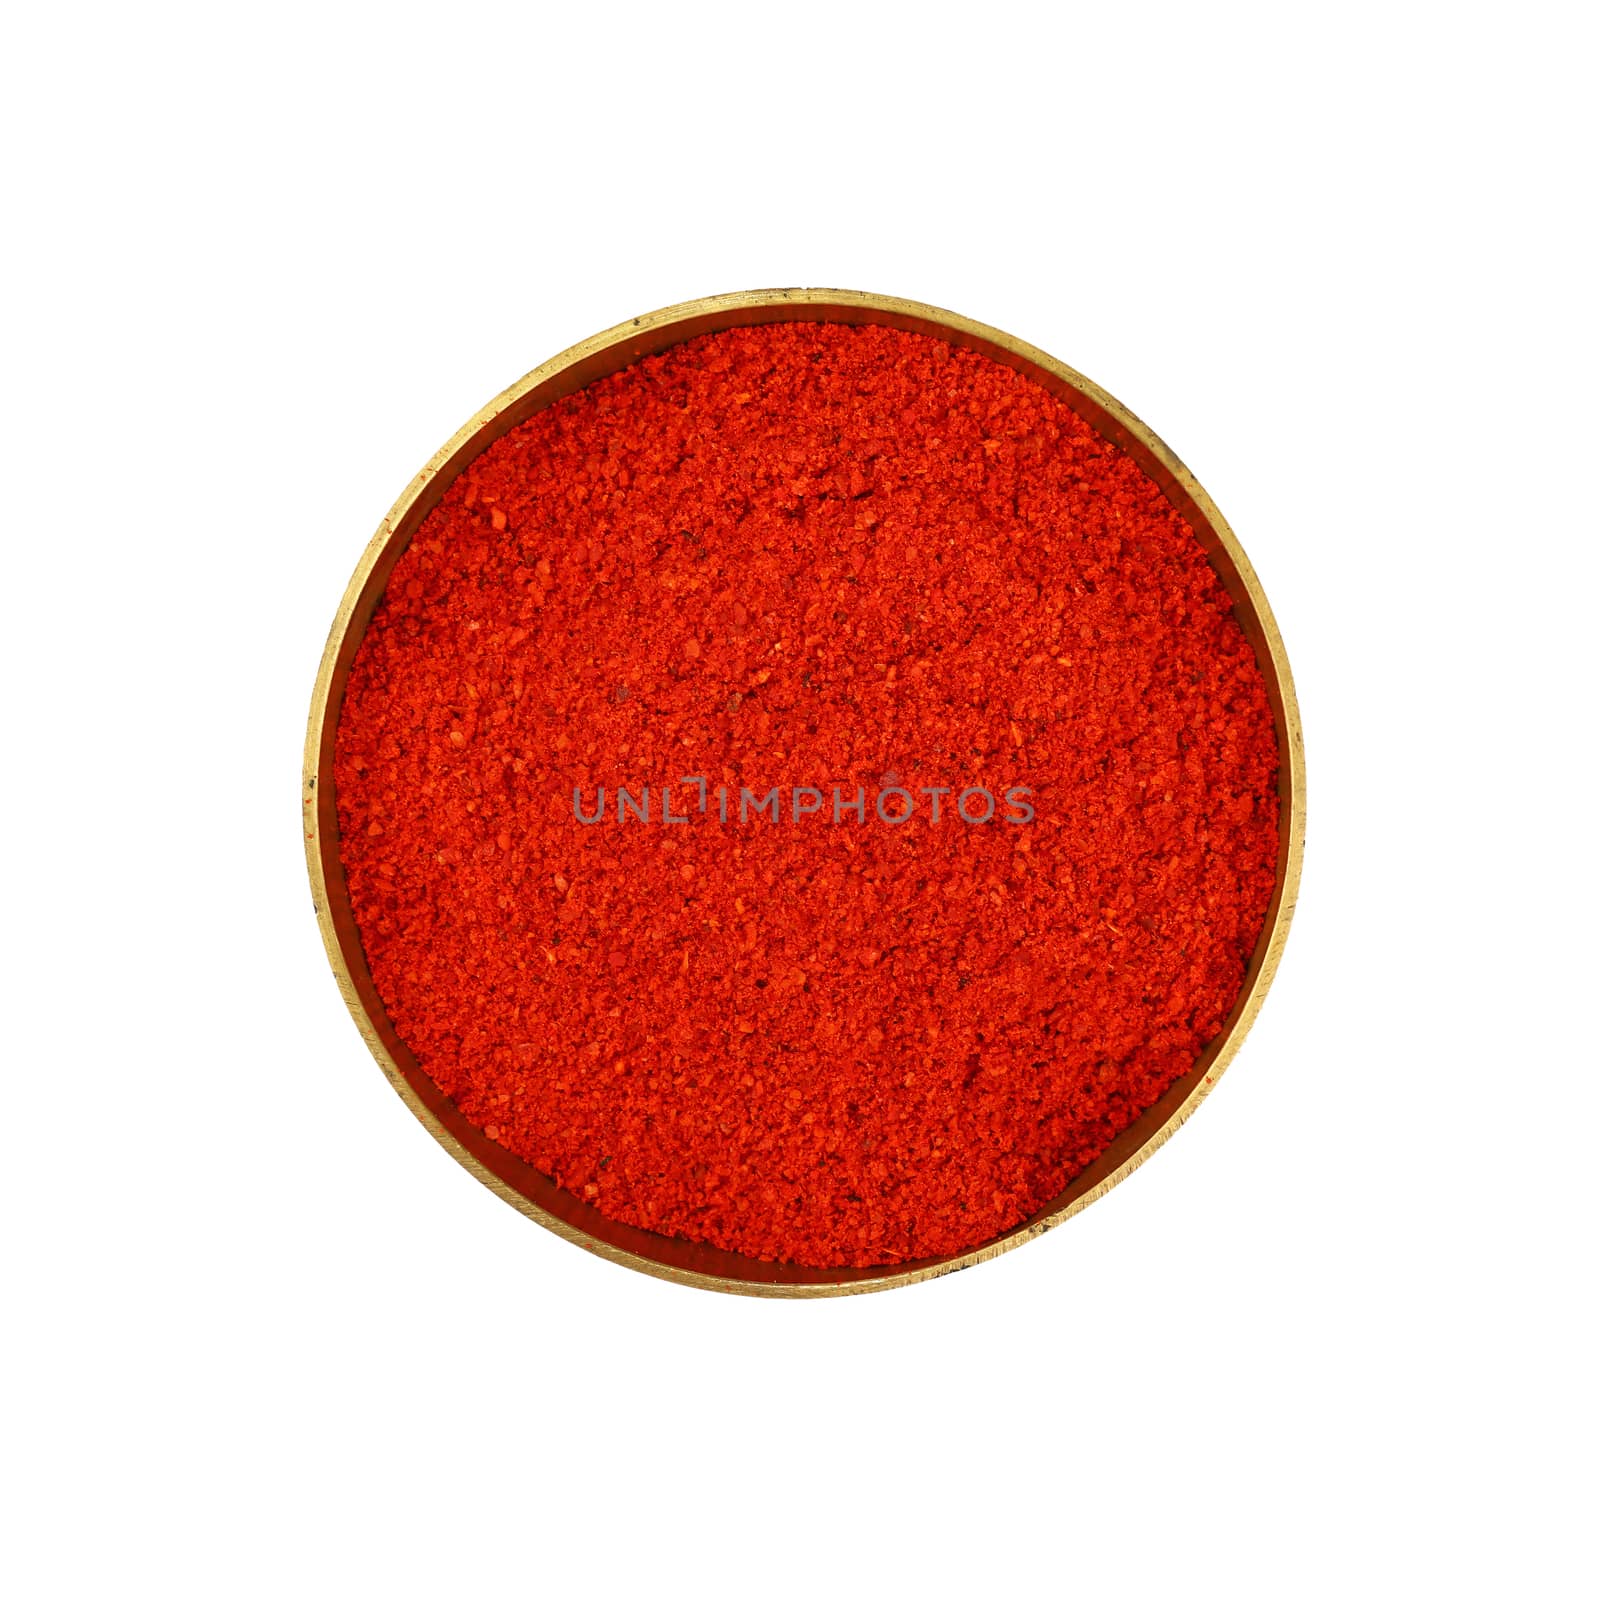 Close up one bronze metal bowl full of red chili pepper or paprika powder isolated on white background, elevated top view, directly above